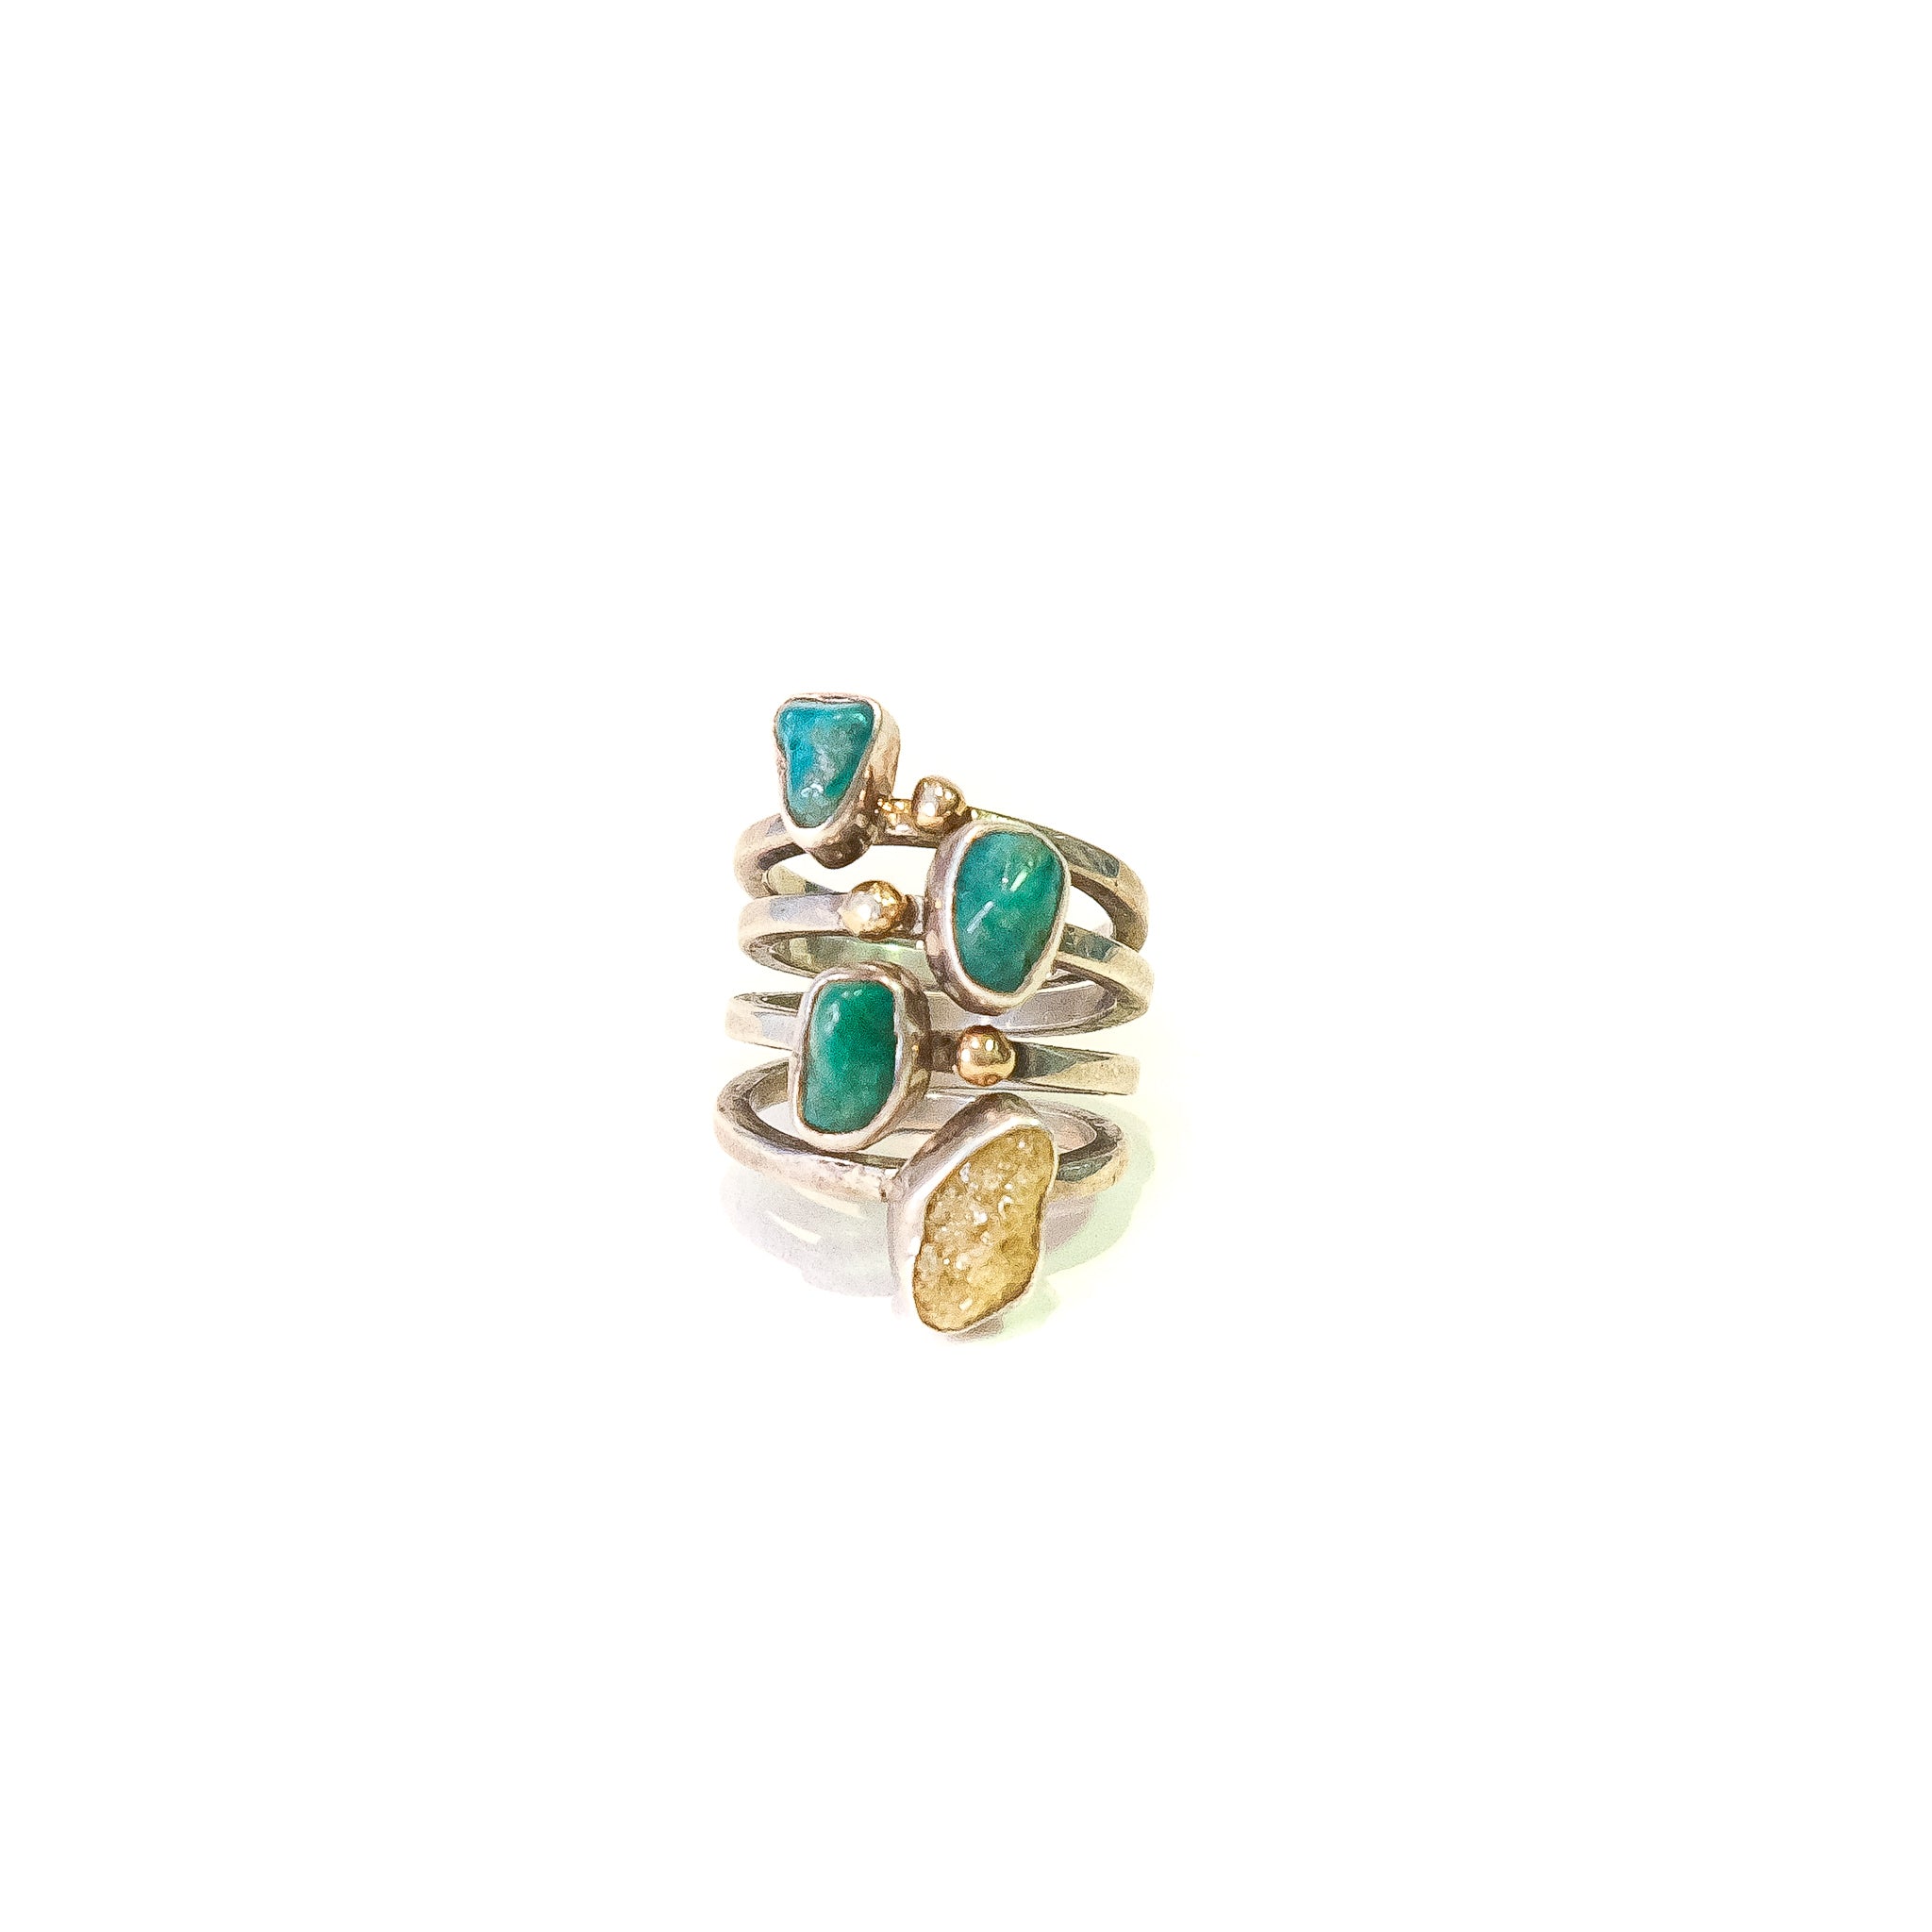 VINTAGE INDIAN JEWELRY / TURQUOISE RING